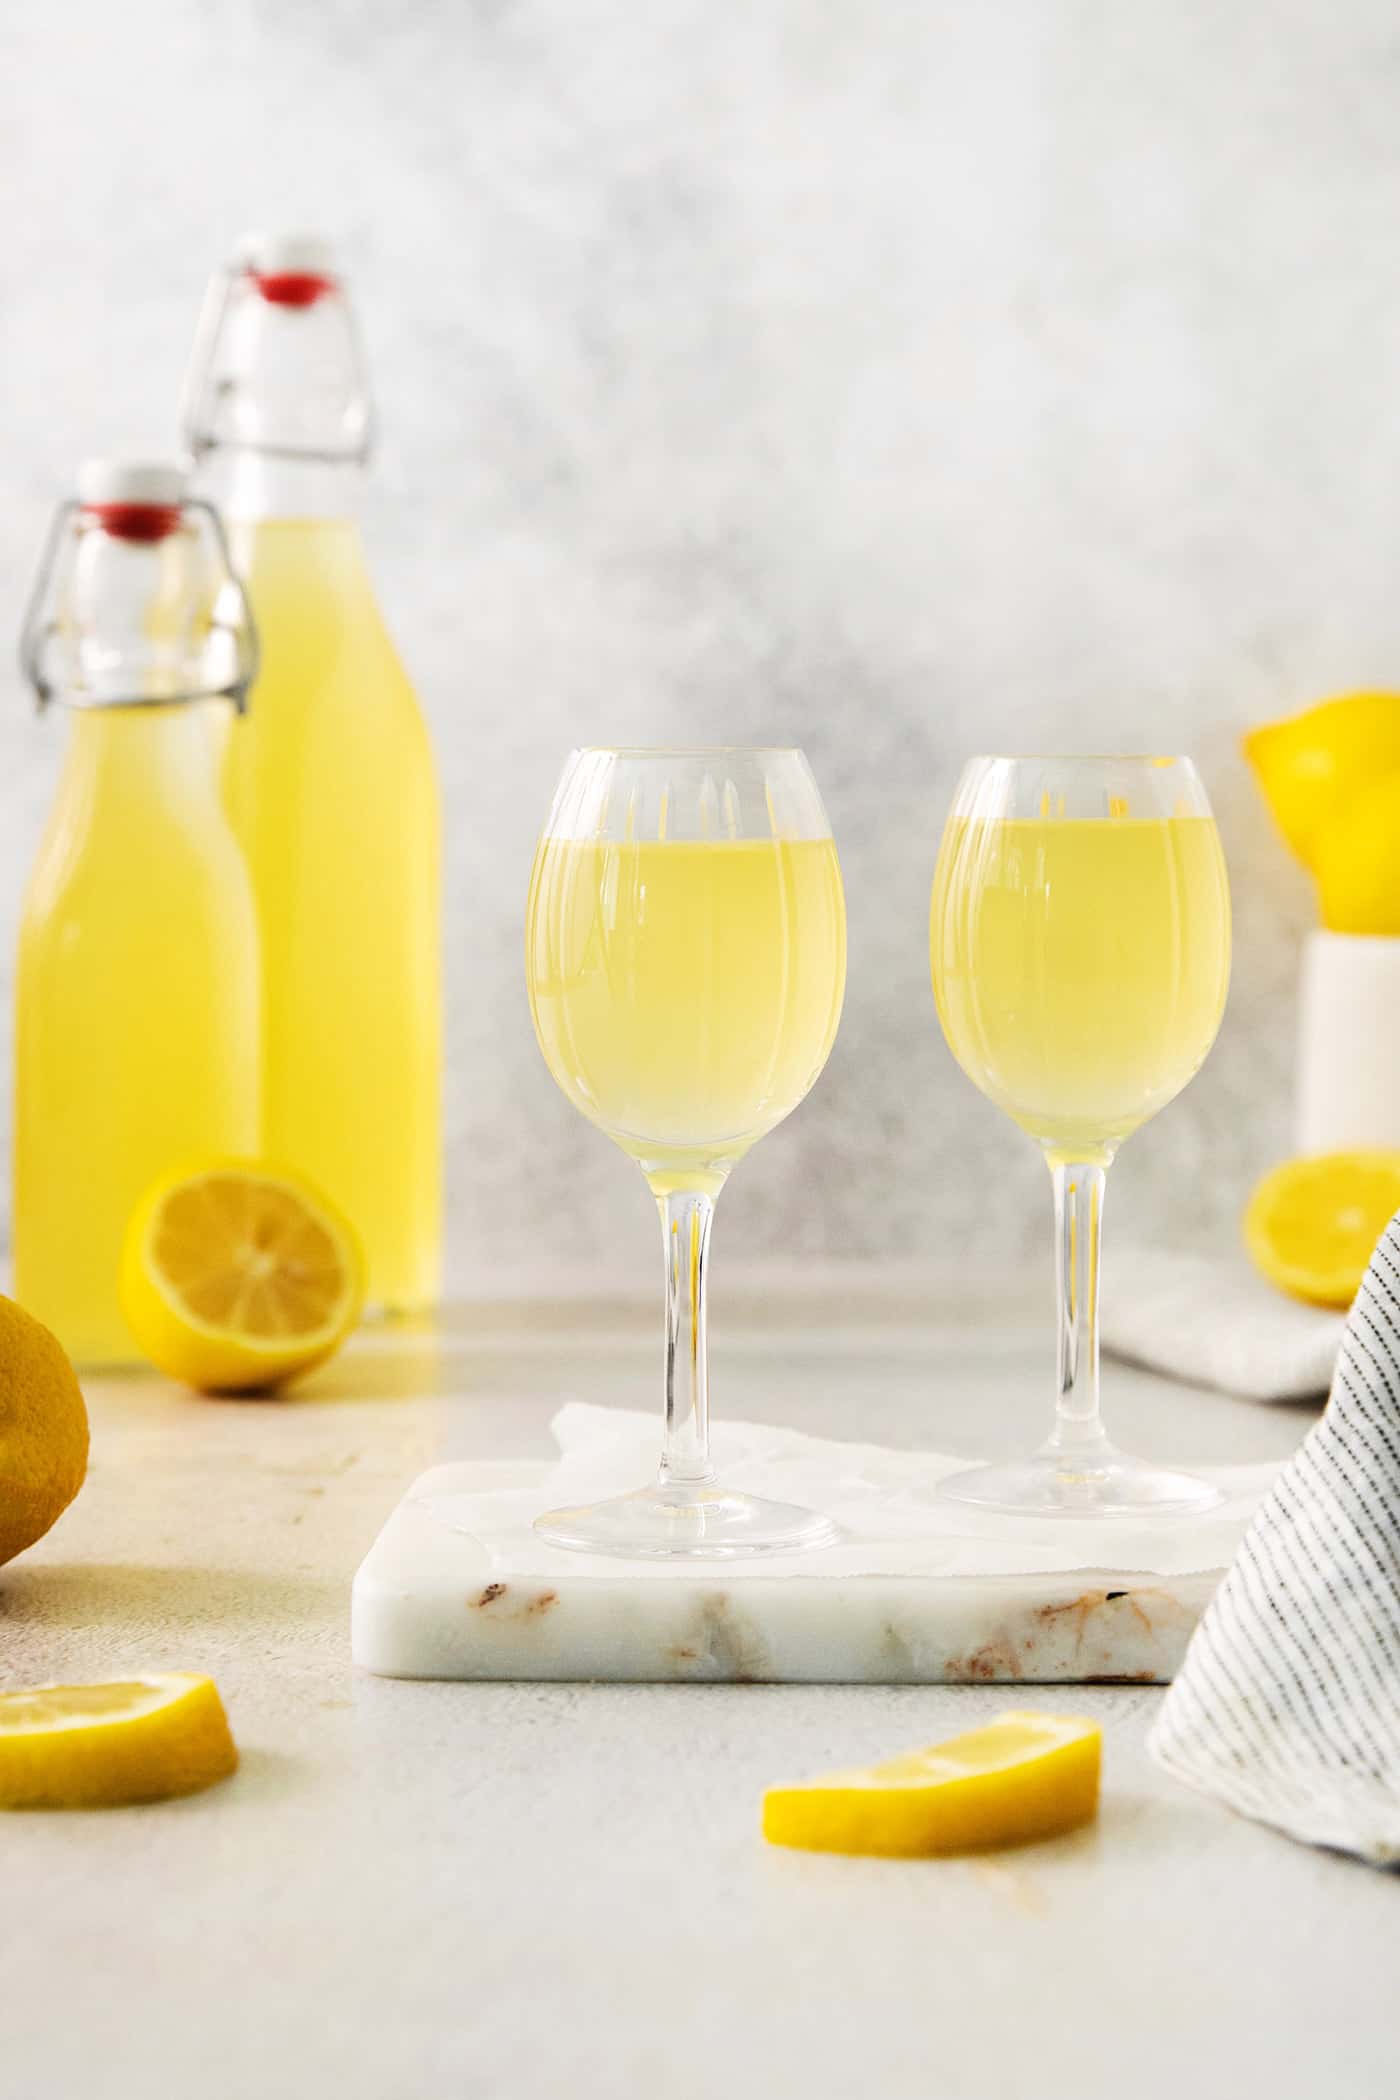 Homemade limoncello in glasses on a marble slabv with a bottle of limoncello in the background.